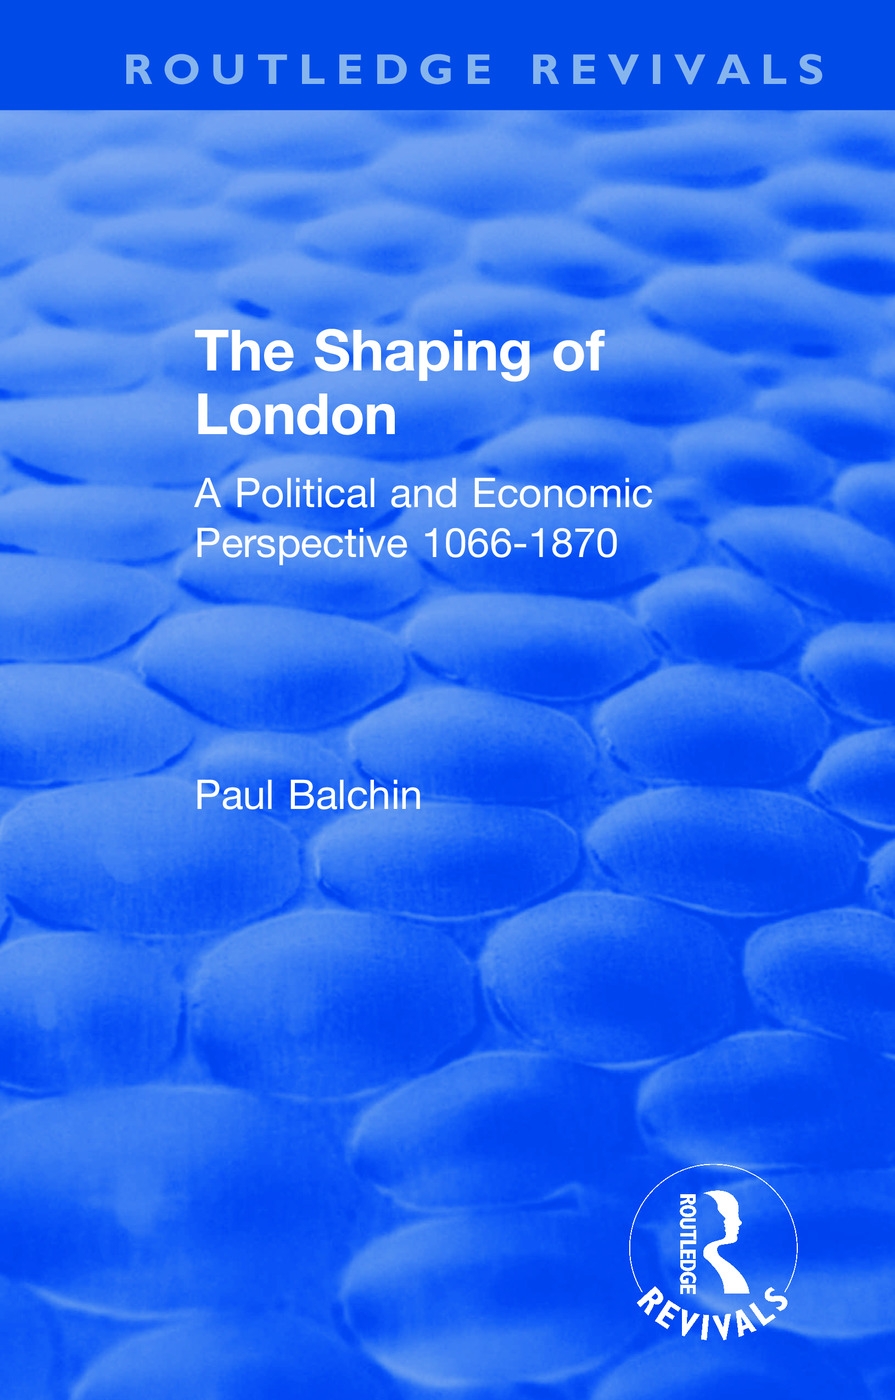 The Shaping of London: A Political and Economic Perspective 1066-1870